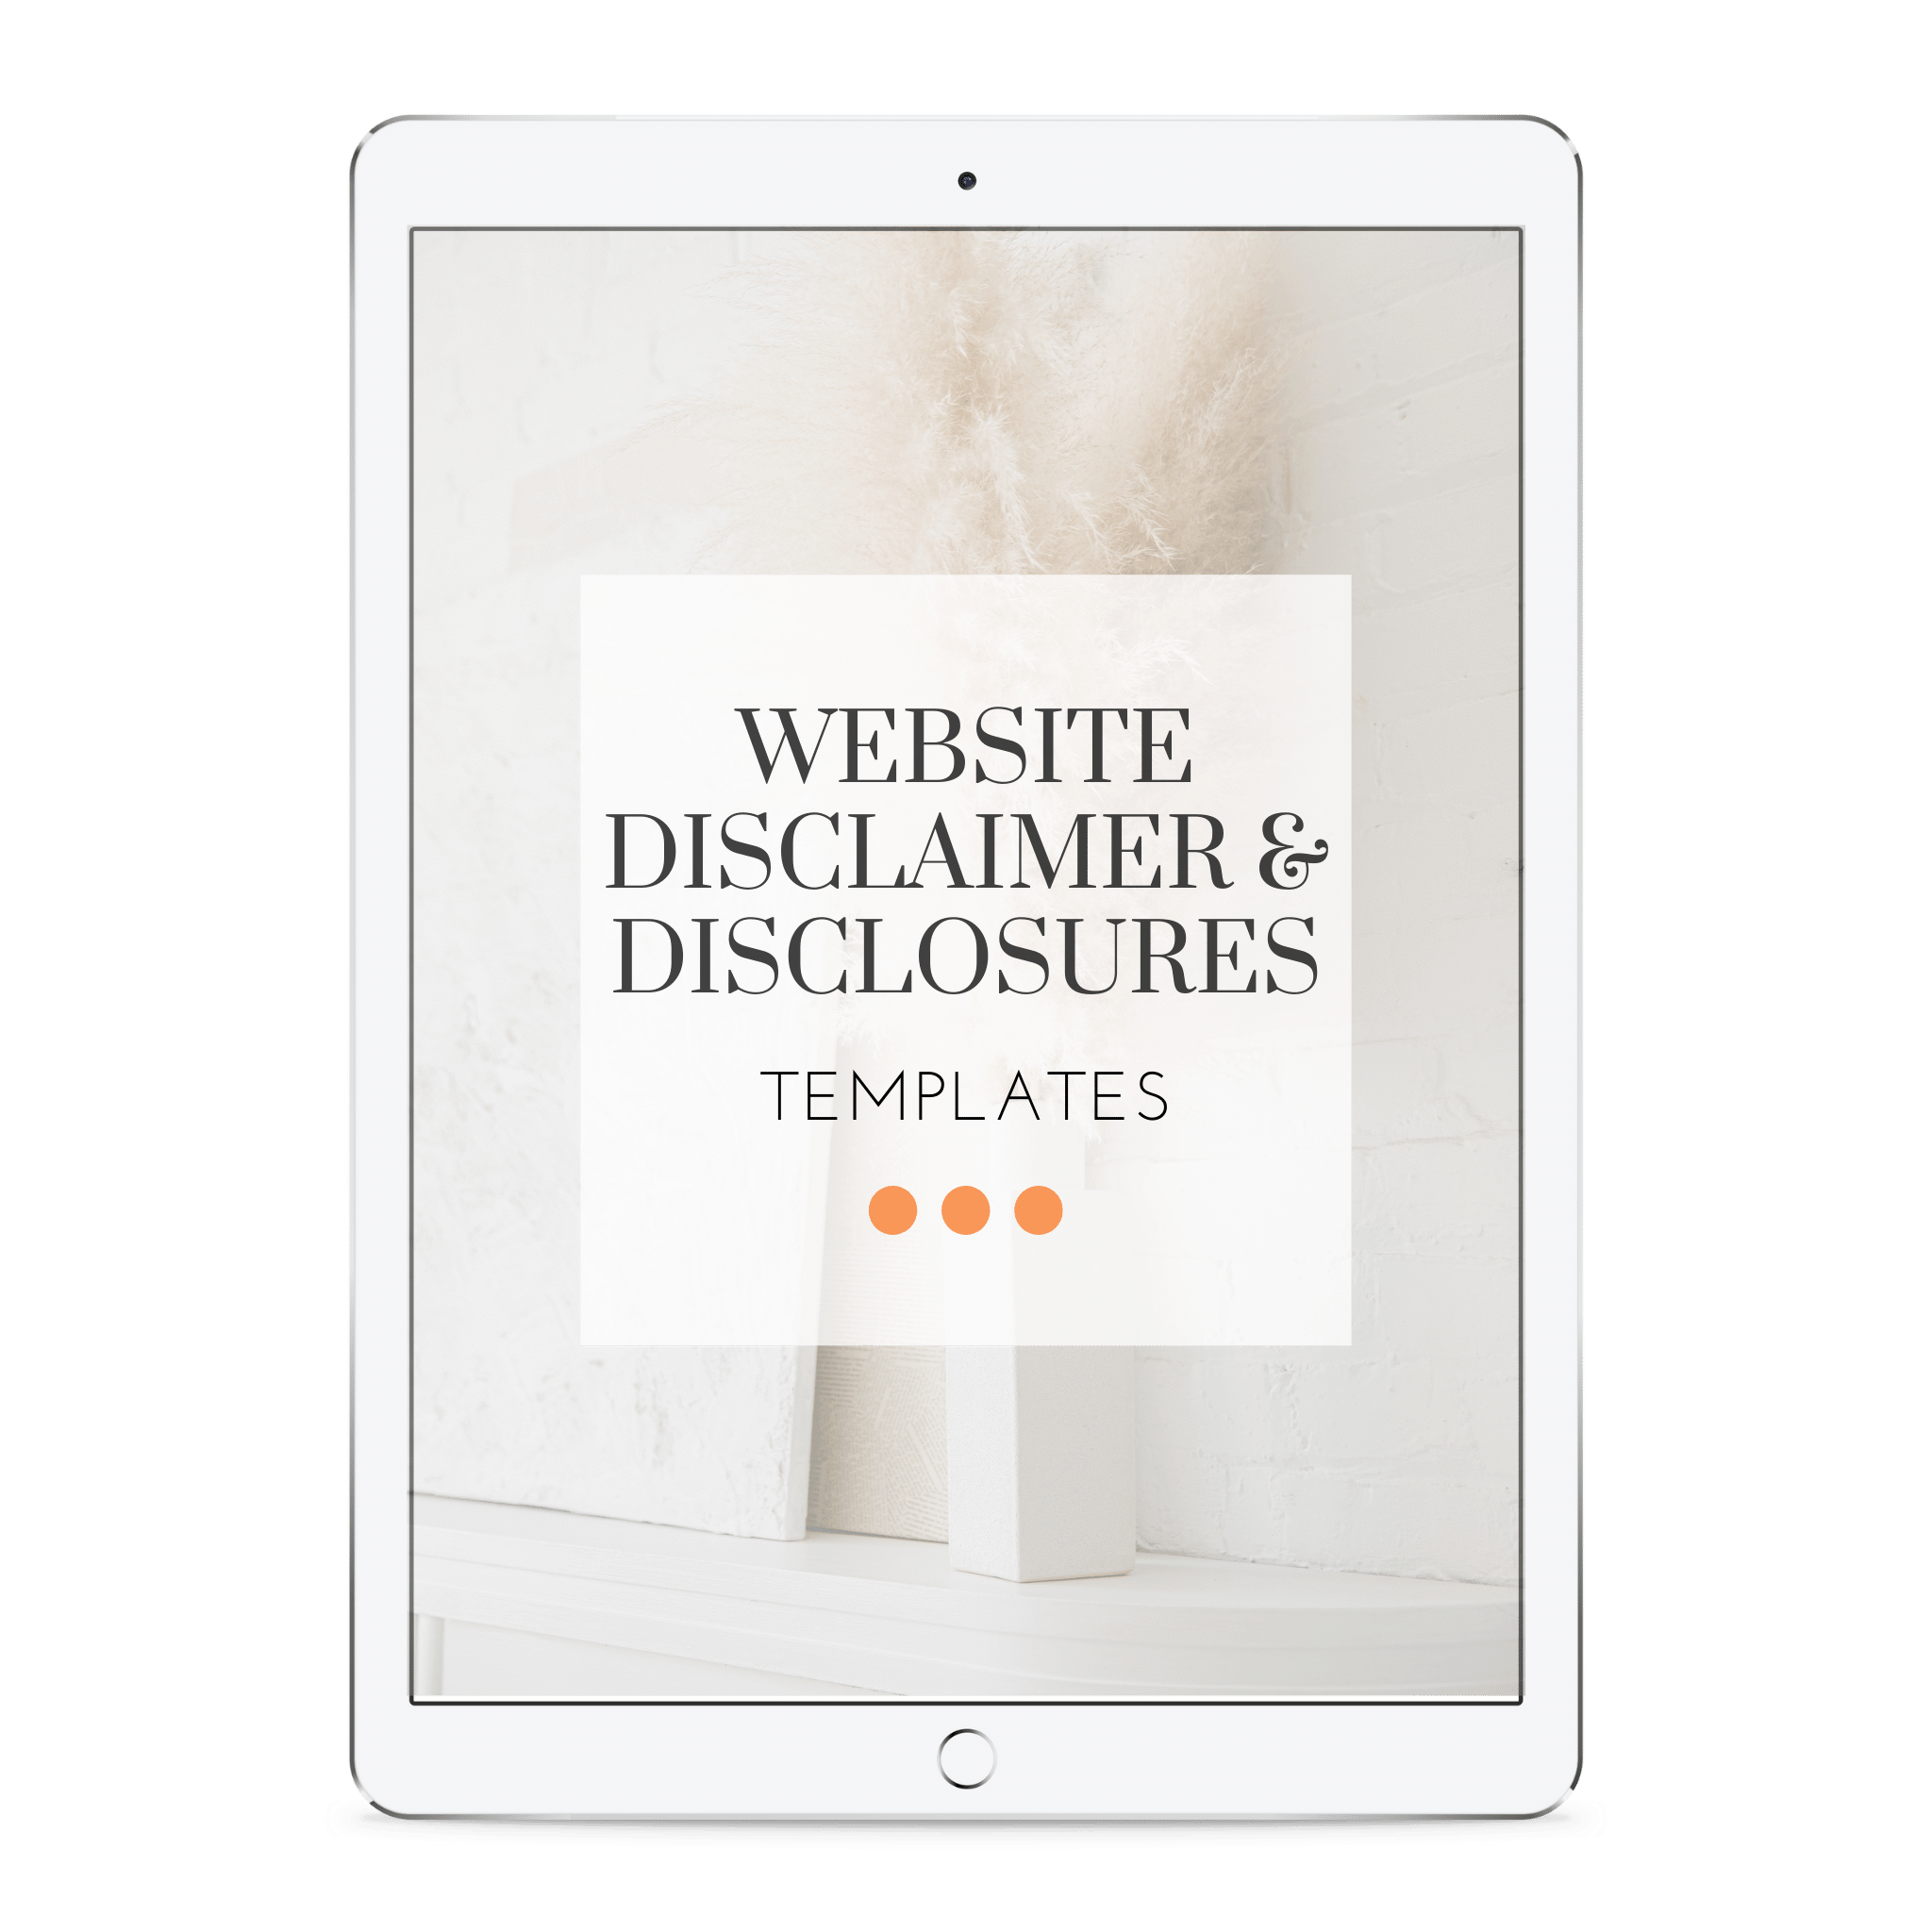 Website Disclaimers and Disclosures Template